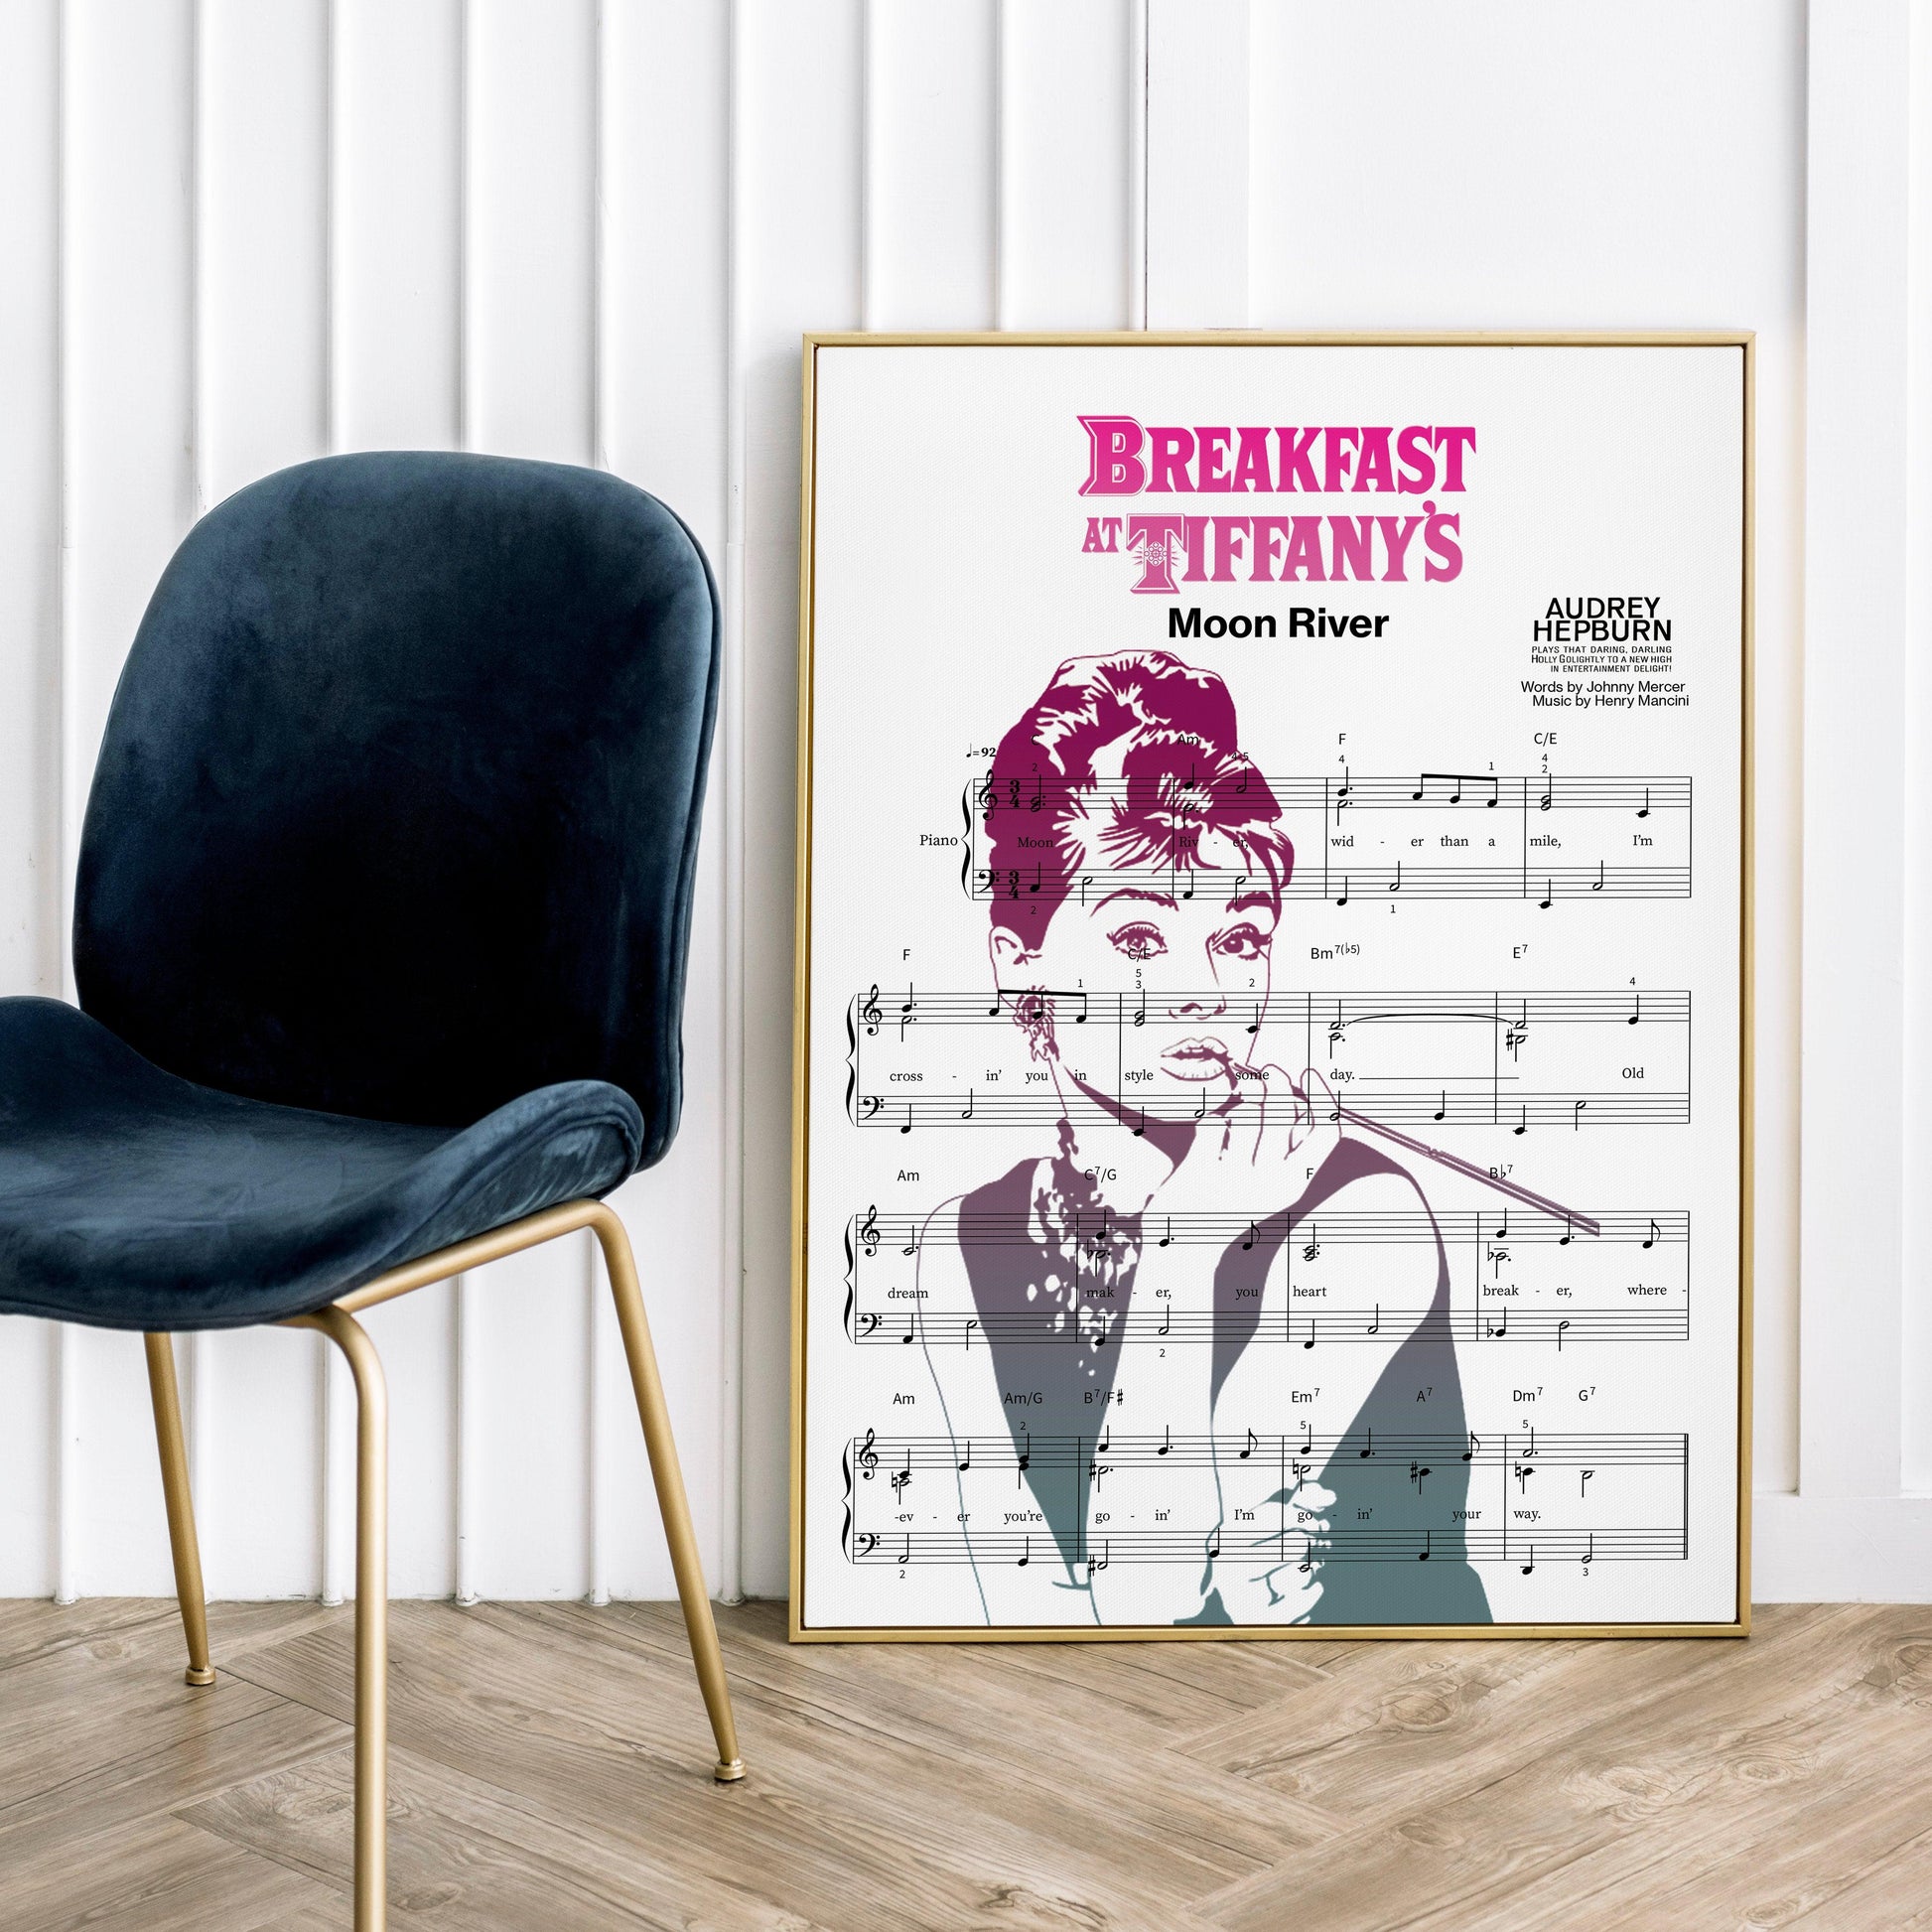 Based on the 1958 novella of the same name by Truman Capote, the 1961 American romantic comedy ‘Breakfast at Tiffany’s’ is considered a classic of twentieth-century cinema. Directed by Blake Edwards, the film is set in New York and follows eccentric socialite Holly Golightly (played by Audrey Hepburn)